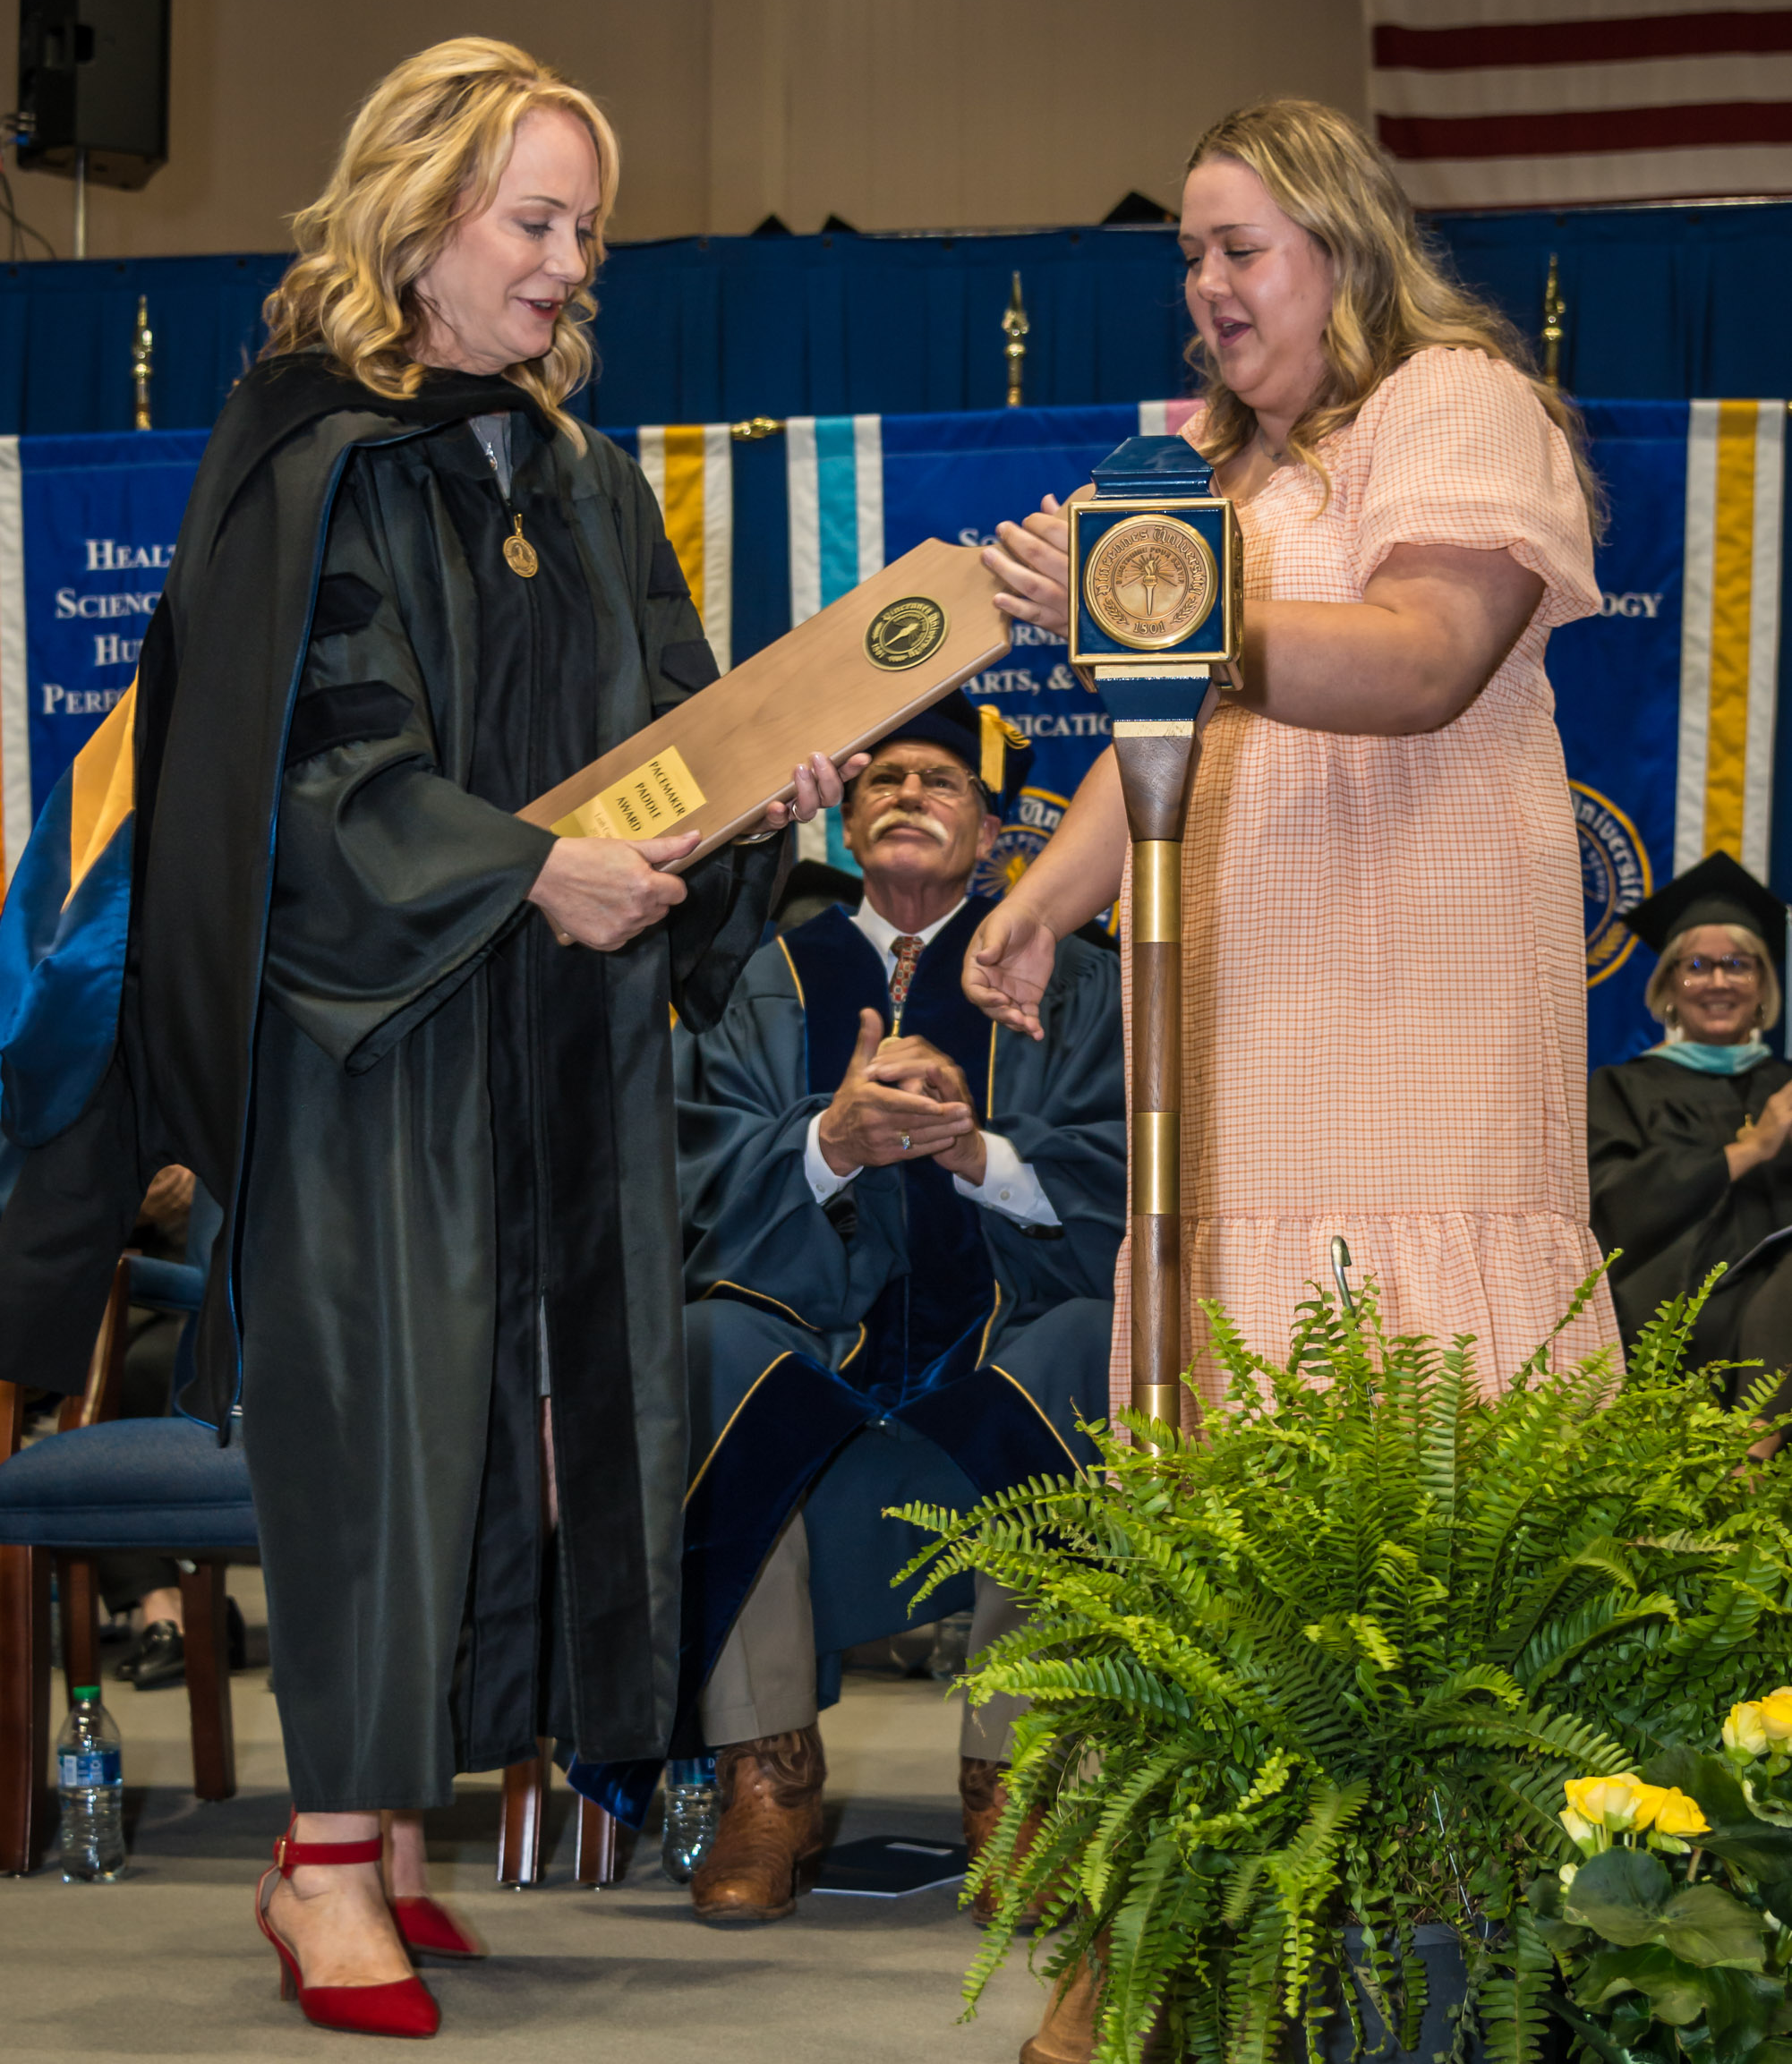 A VU student hands Leah Curry who is dressed in a doctorate robe and hood a paddle award.